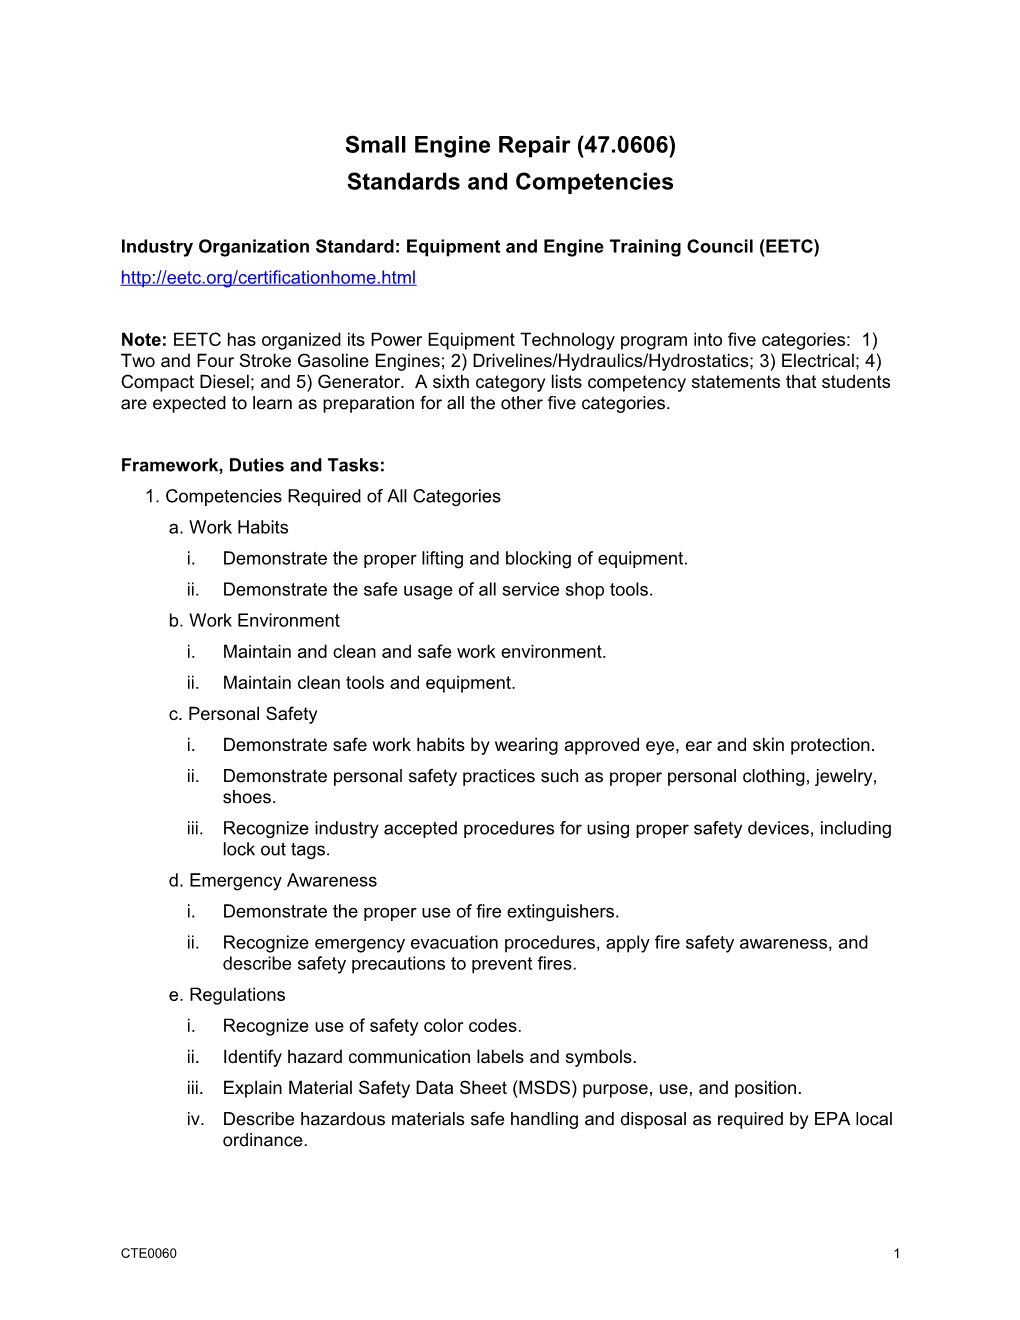 Industry Organization Standard: Equipment and Engine Training Council (EETC)